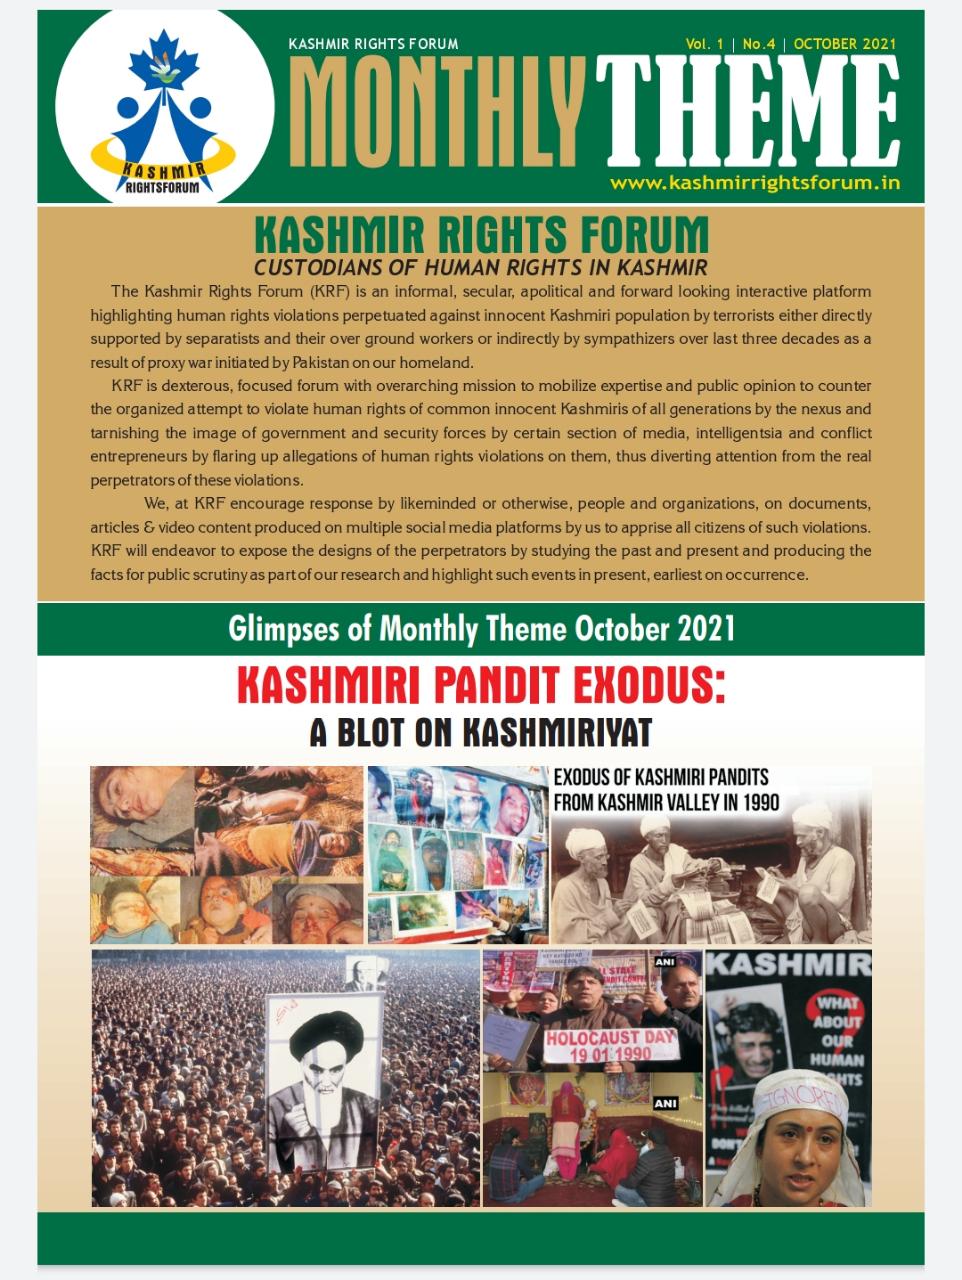 A preview of Monthly Theme Oct 2021 composing of Pandit Exodus in Kashmir during the period of 1990.